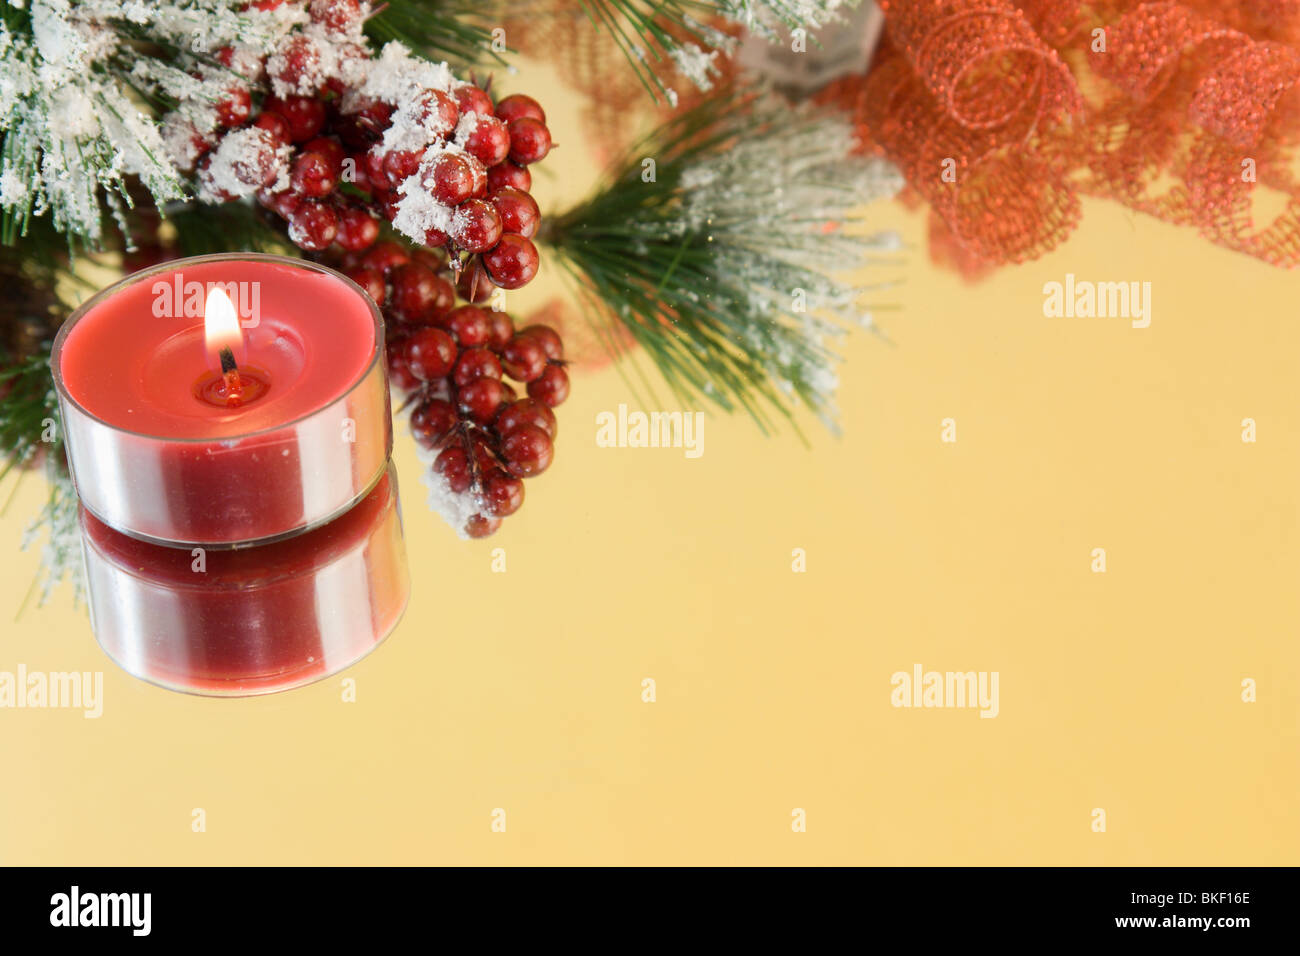 single red tealight candle with snow draped fir branch and red berries with copyspace Stock Photo